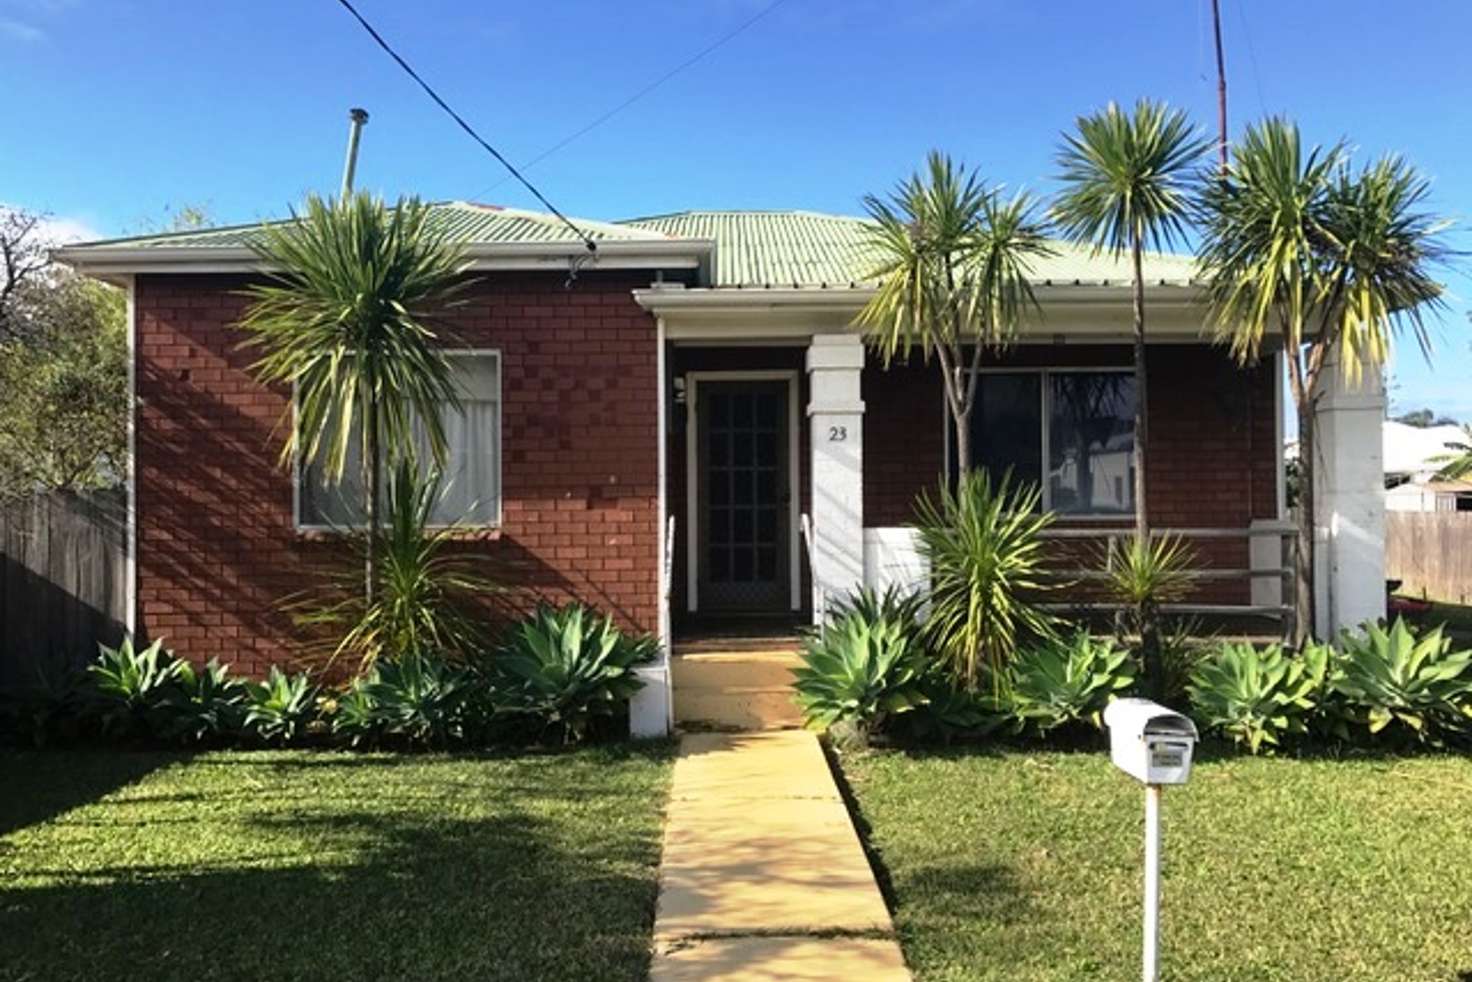 Main view of Homely house listing, 23 Evans Street, Wollongong NSW 2500